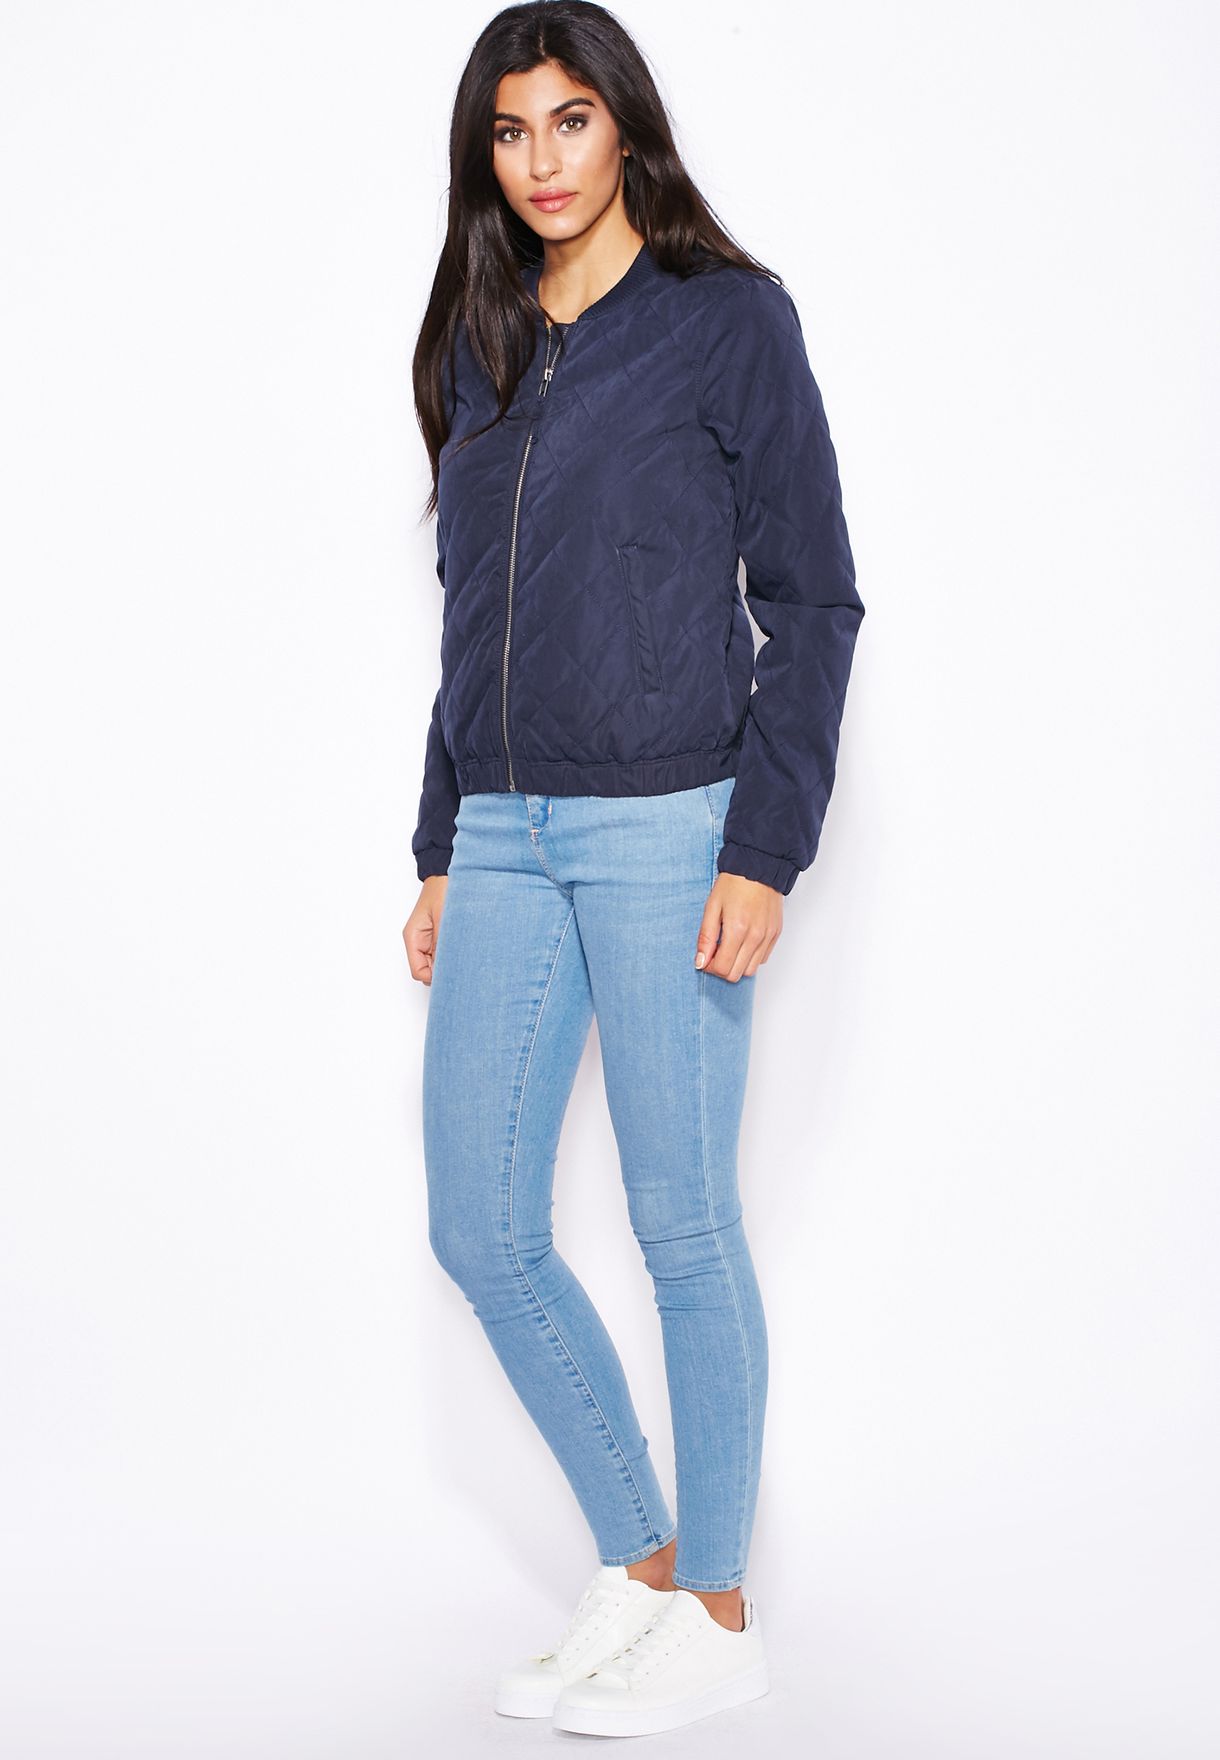 Buy Jacqueline De Yong blue Quilted Bomber for in MENA, Worldwide